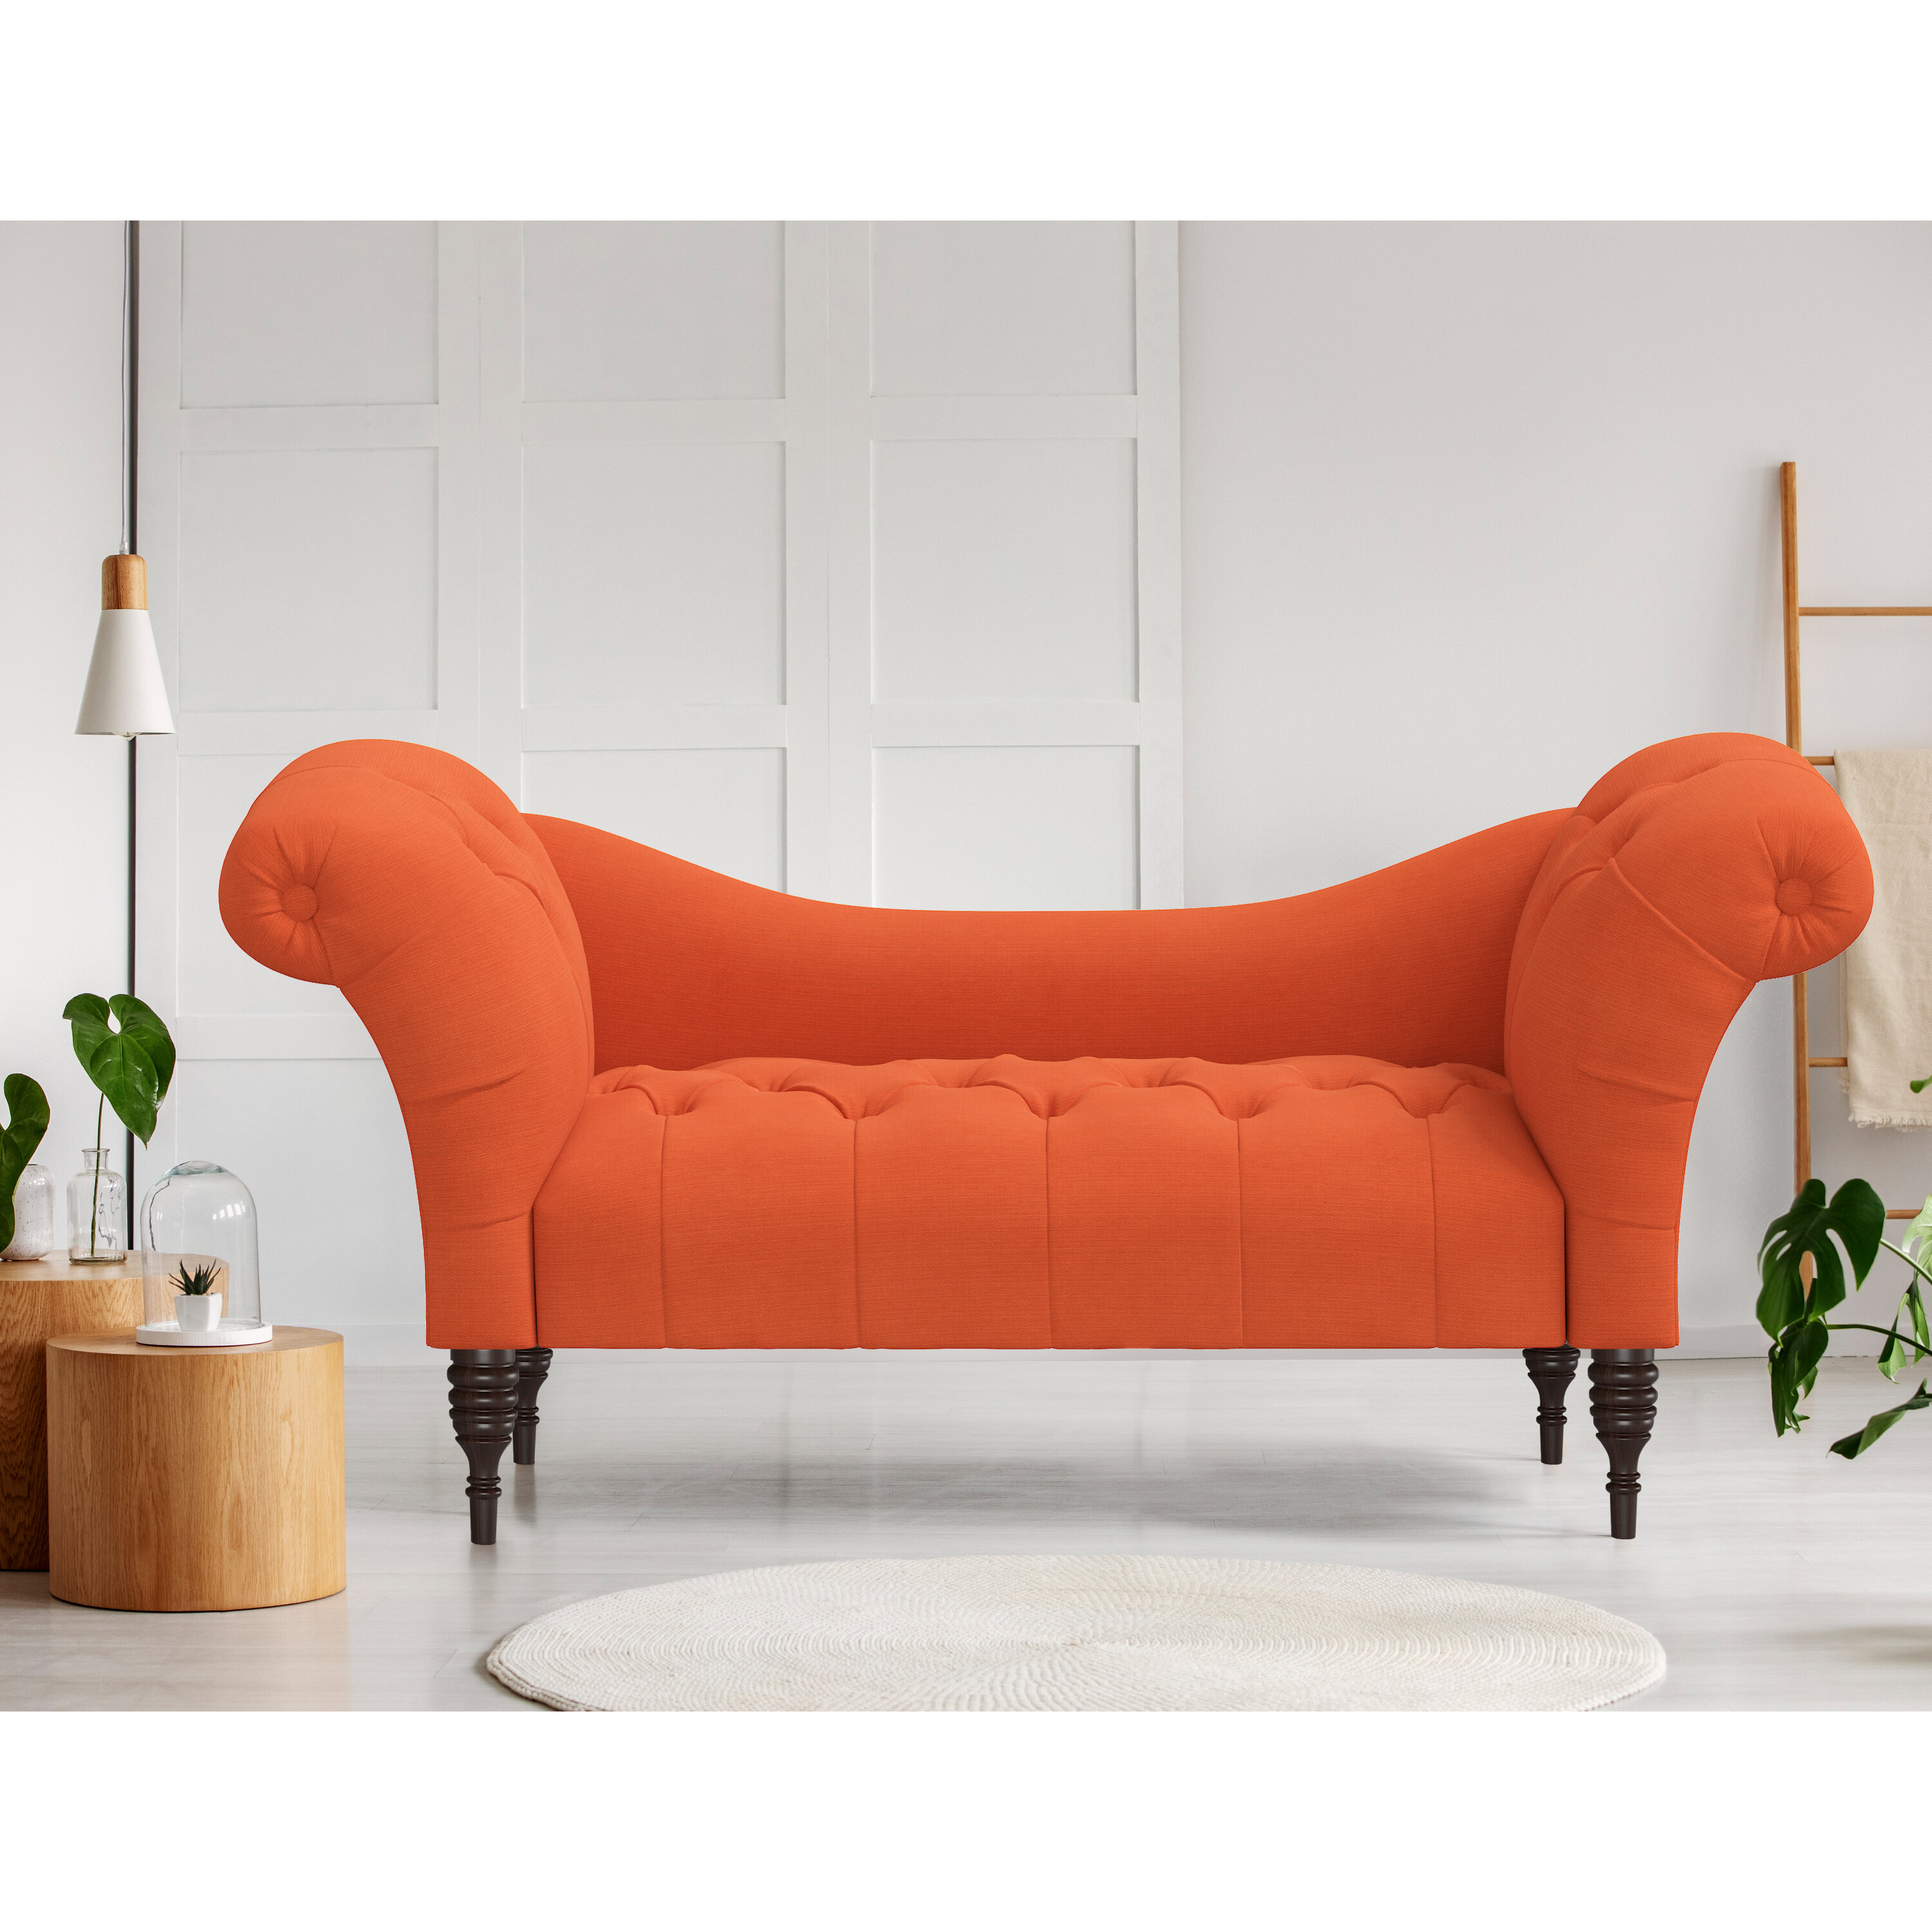 Eslettes Upholstered Chaise Lounge